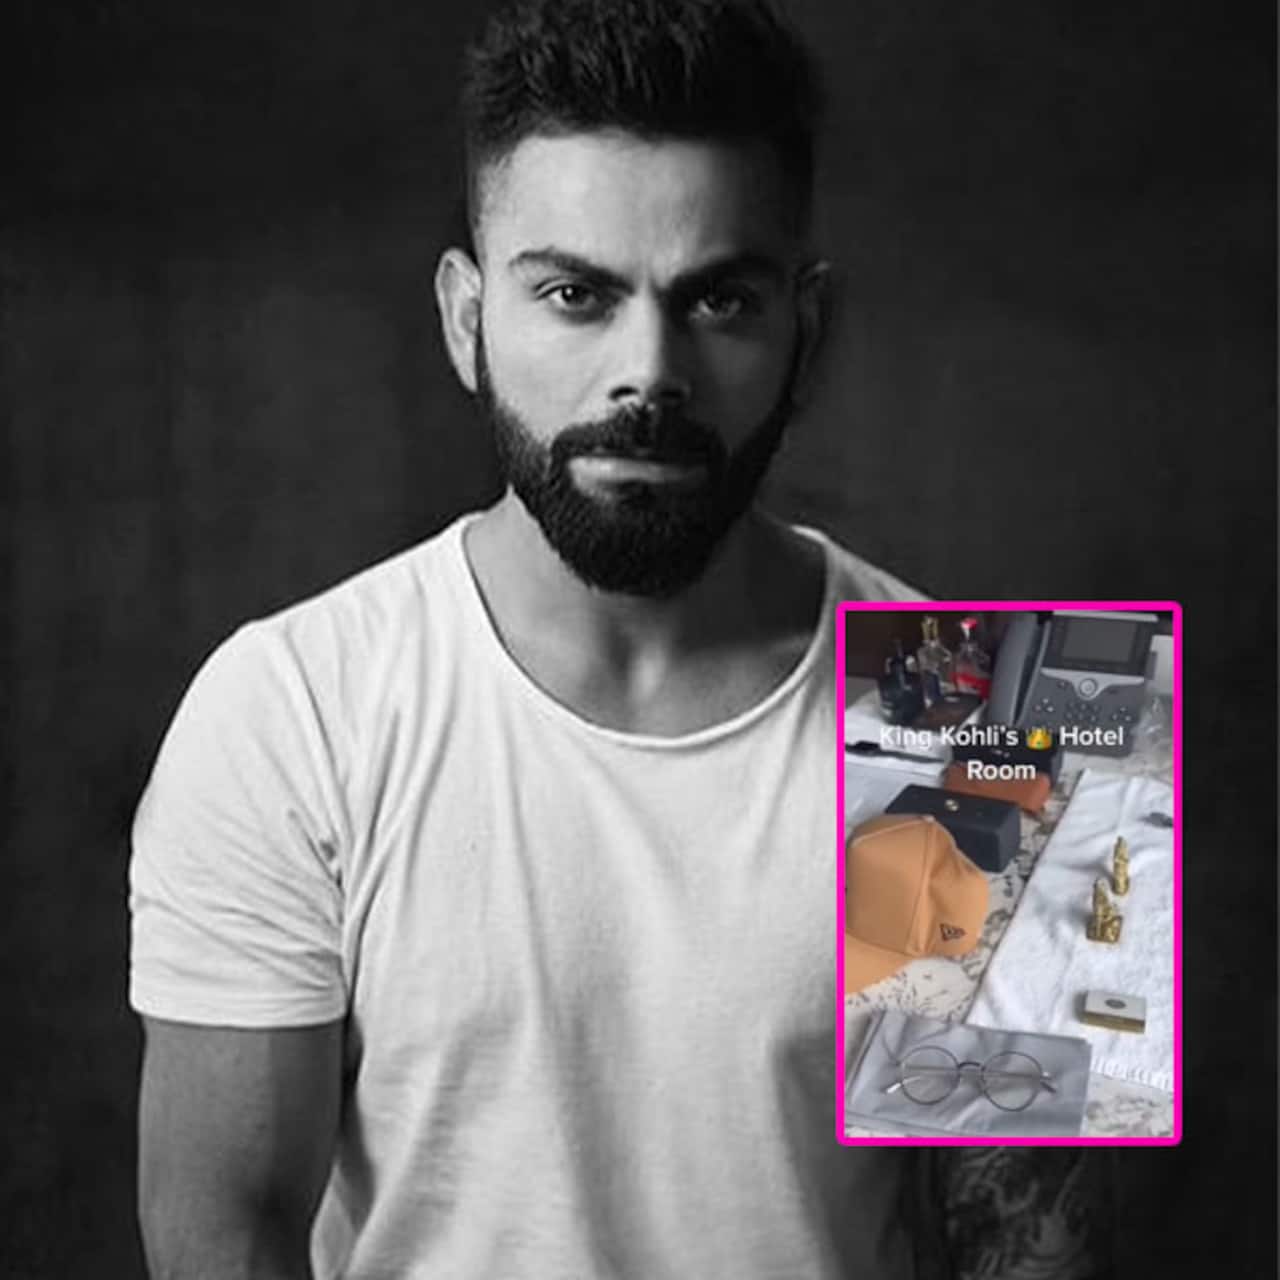 Virat Kohli highly upset with invasion of privacy as video of his hotel room goes viral; 'NOT okay with this kind of fanaticism’